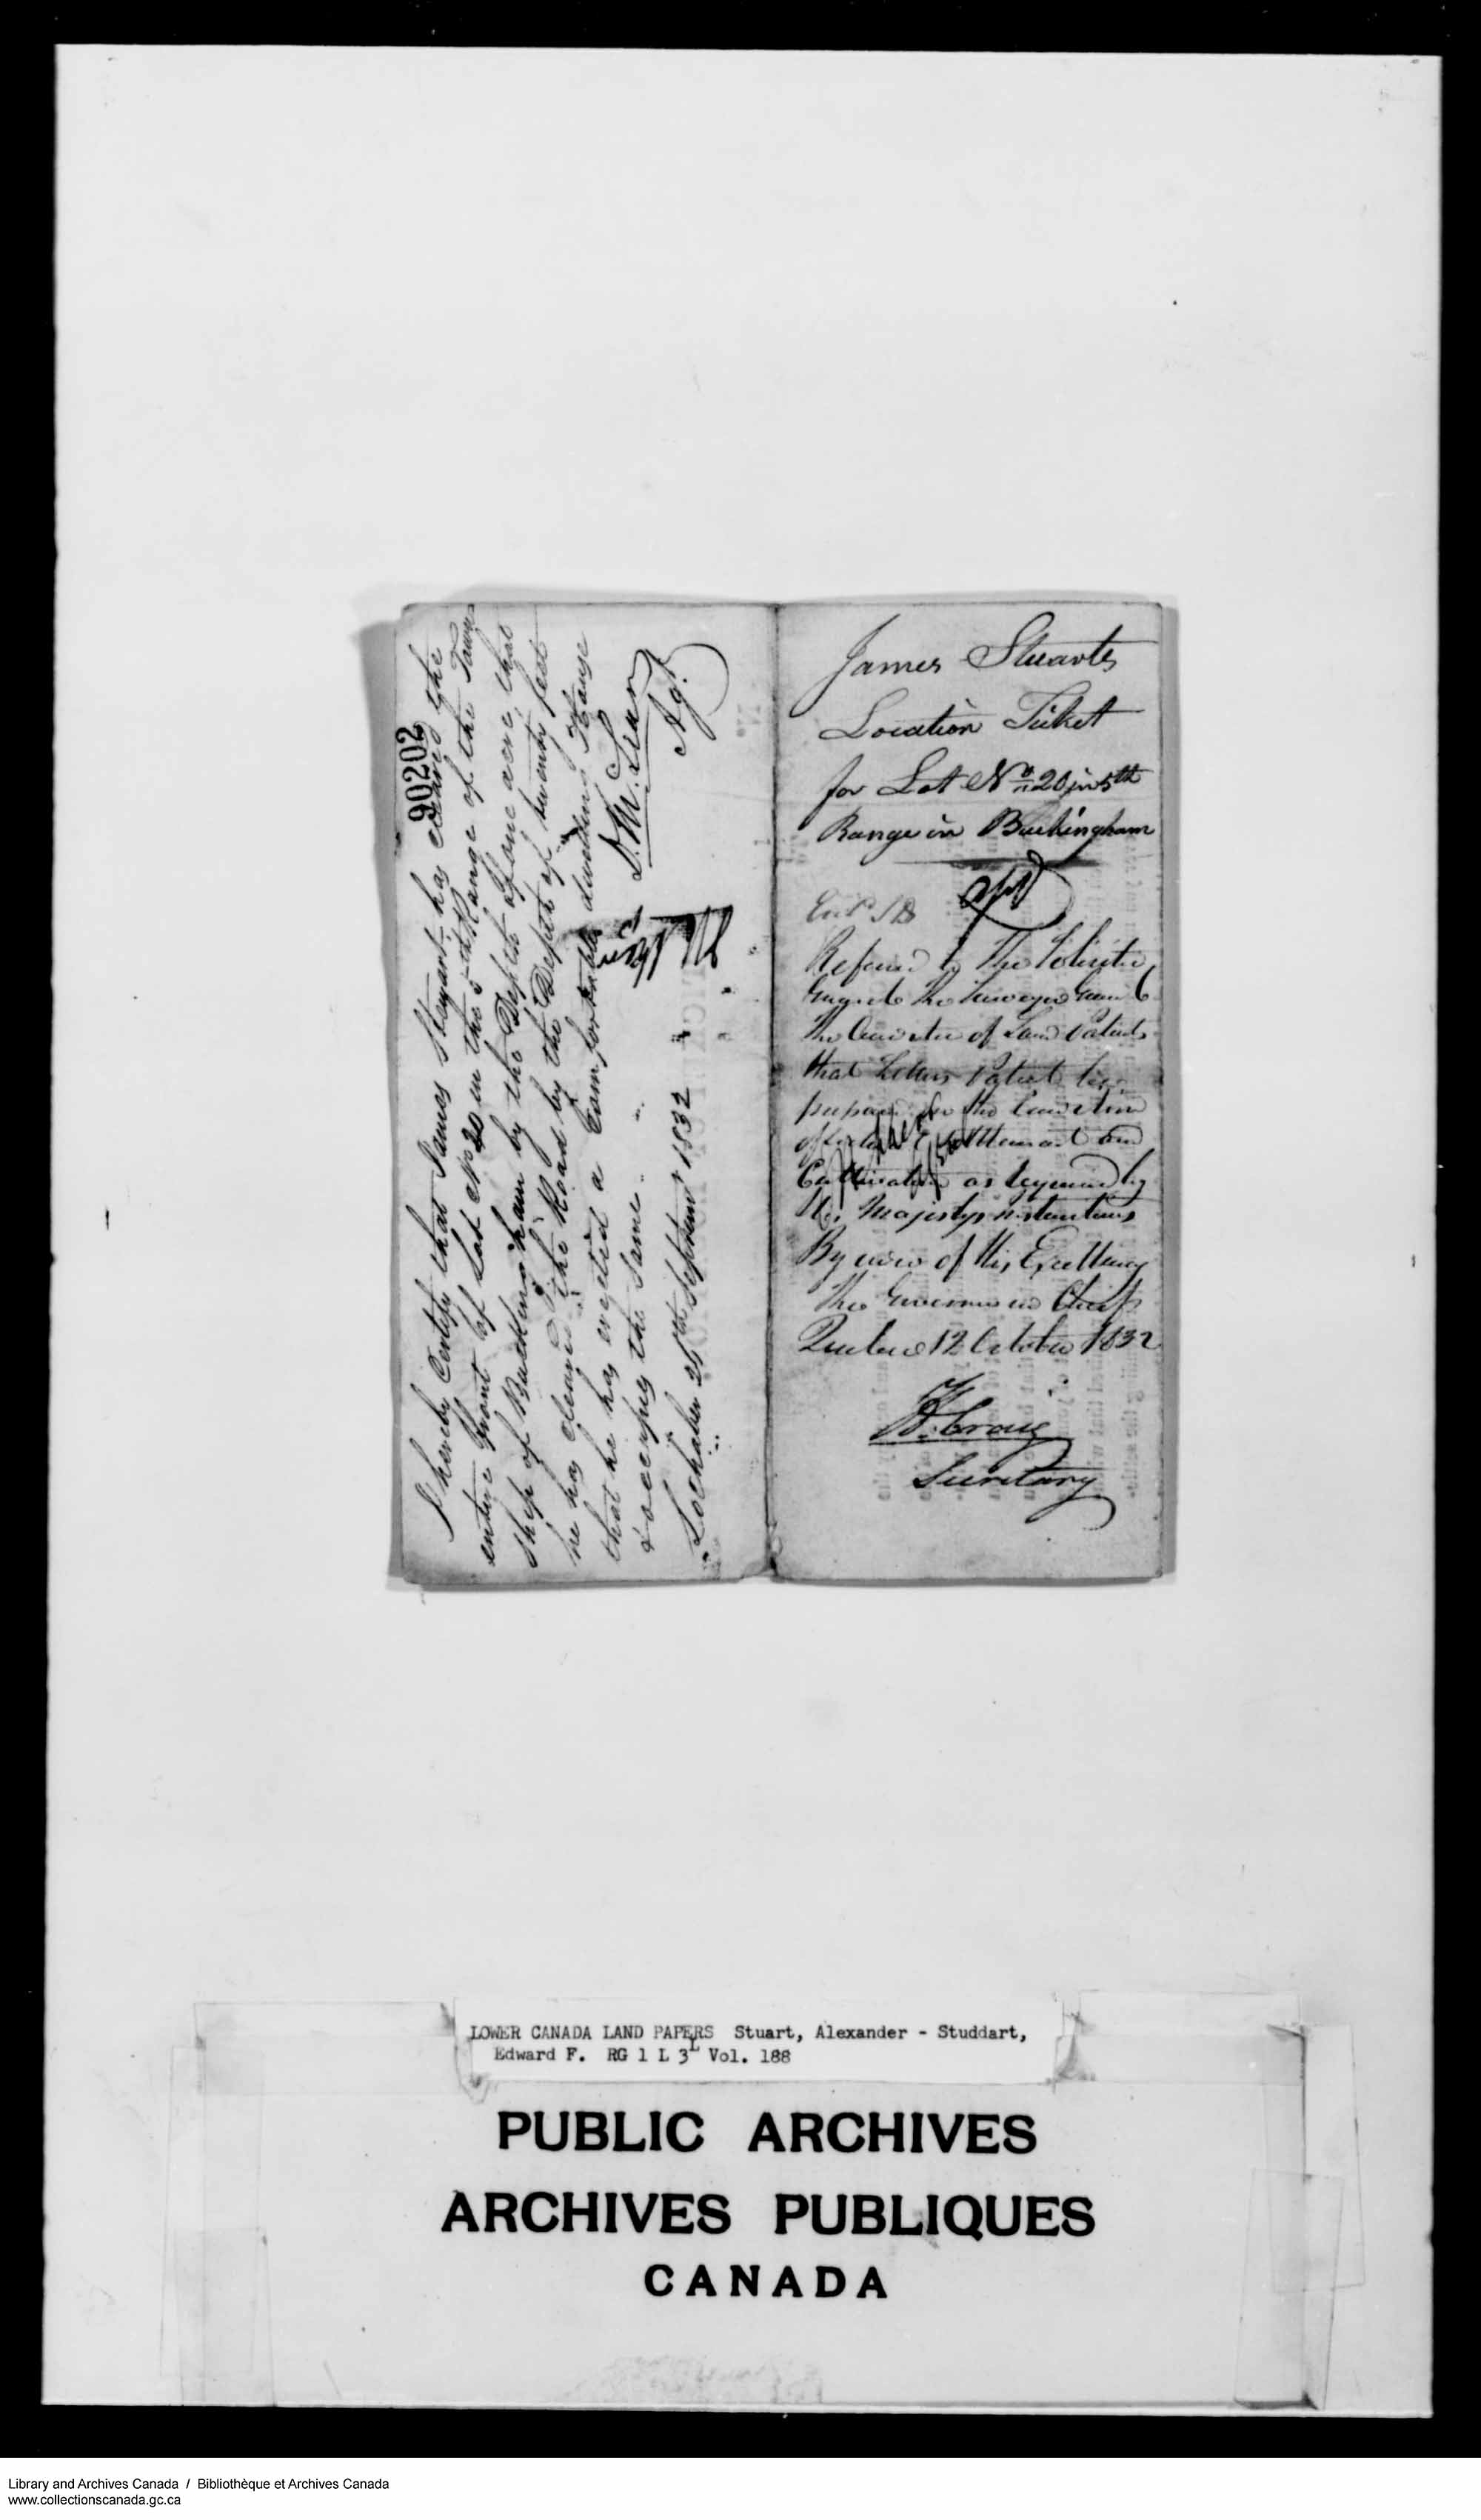 Digitized page of  for Image No.: e008737330